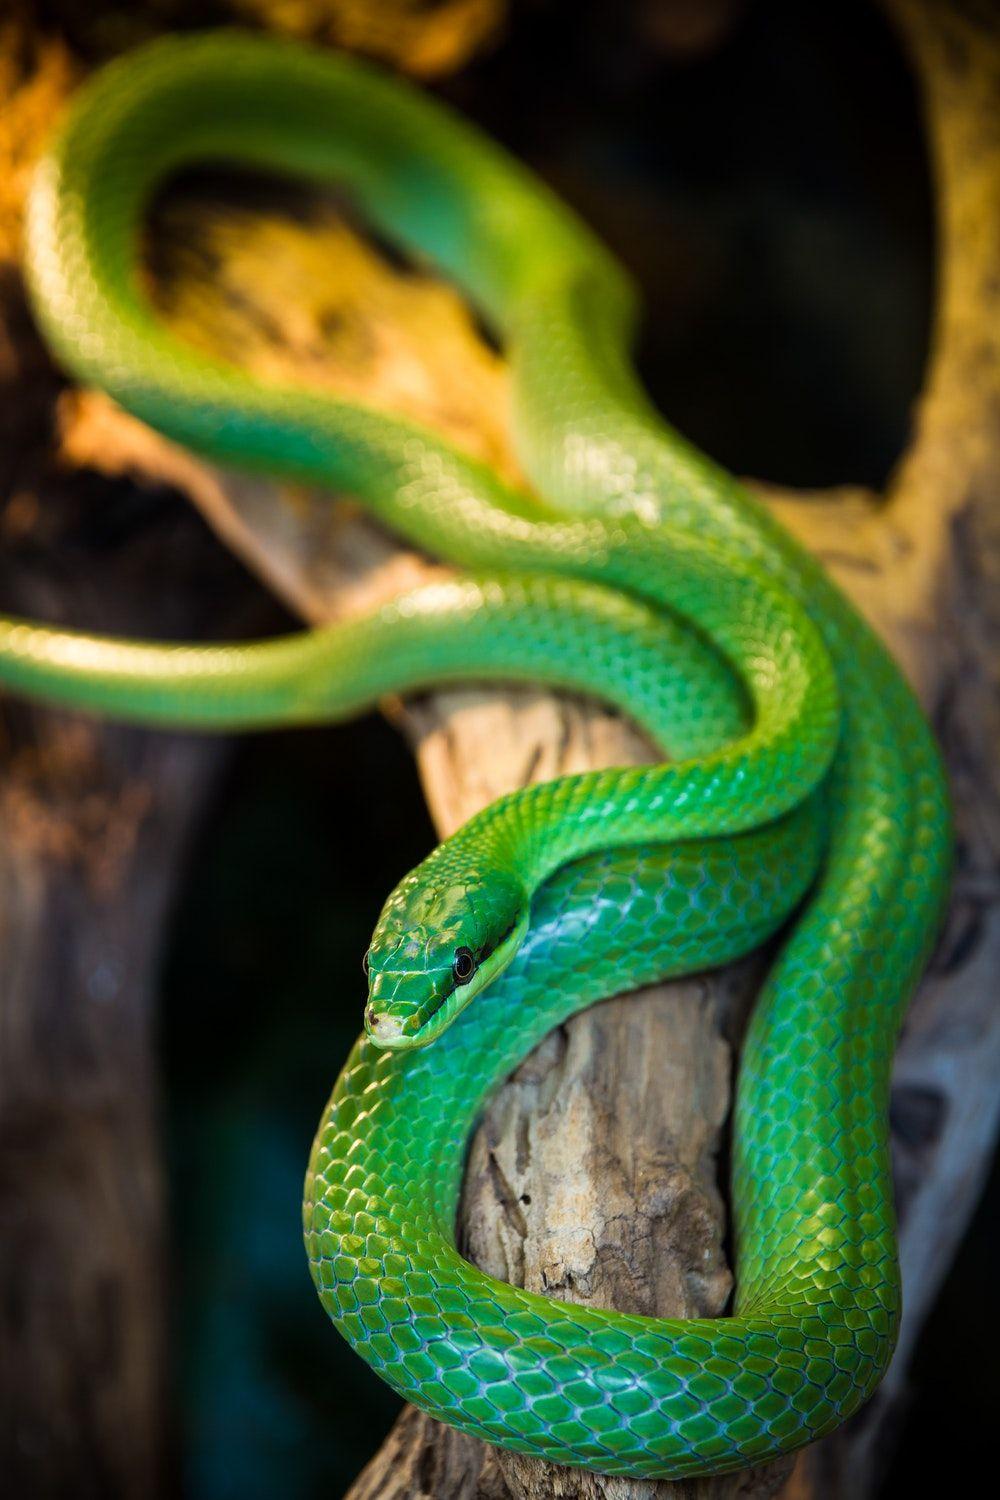 Snake Picture. Download Free Image